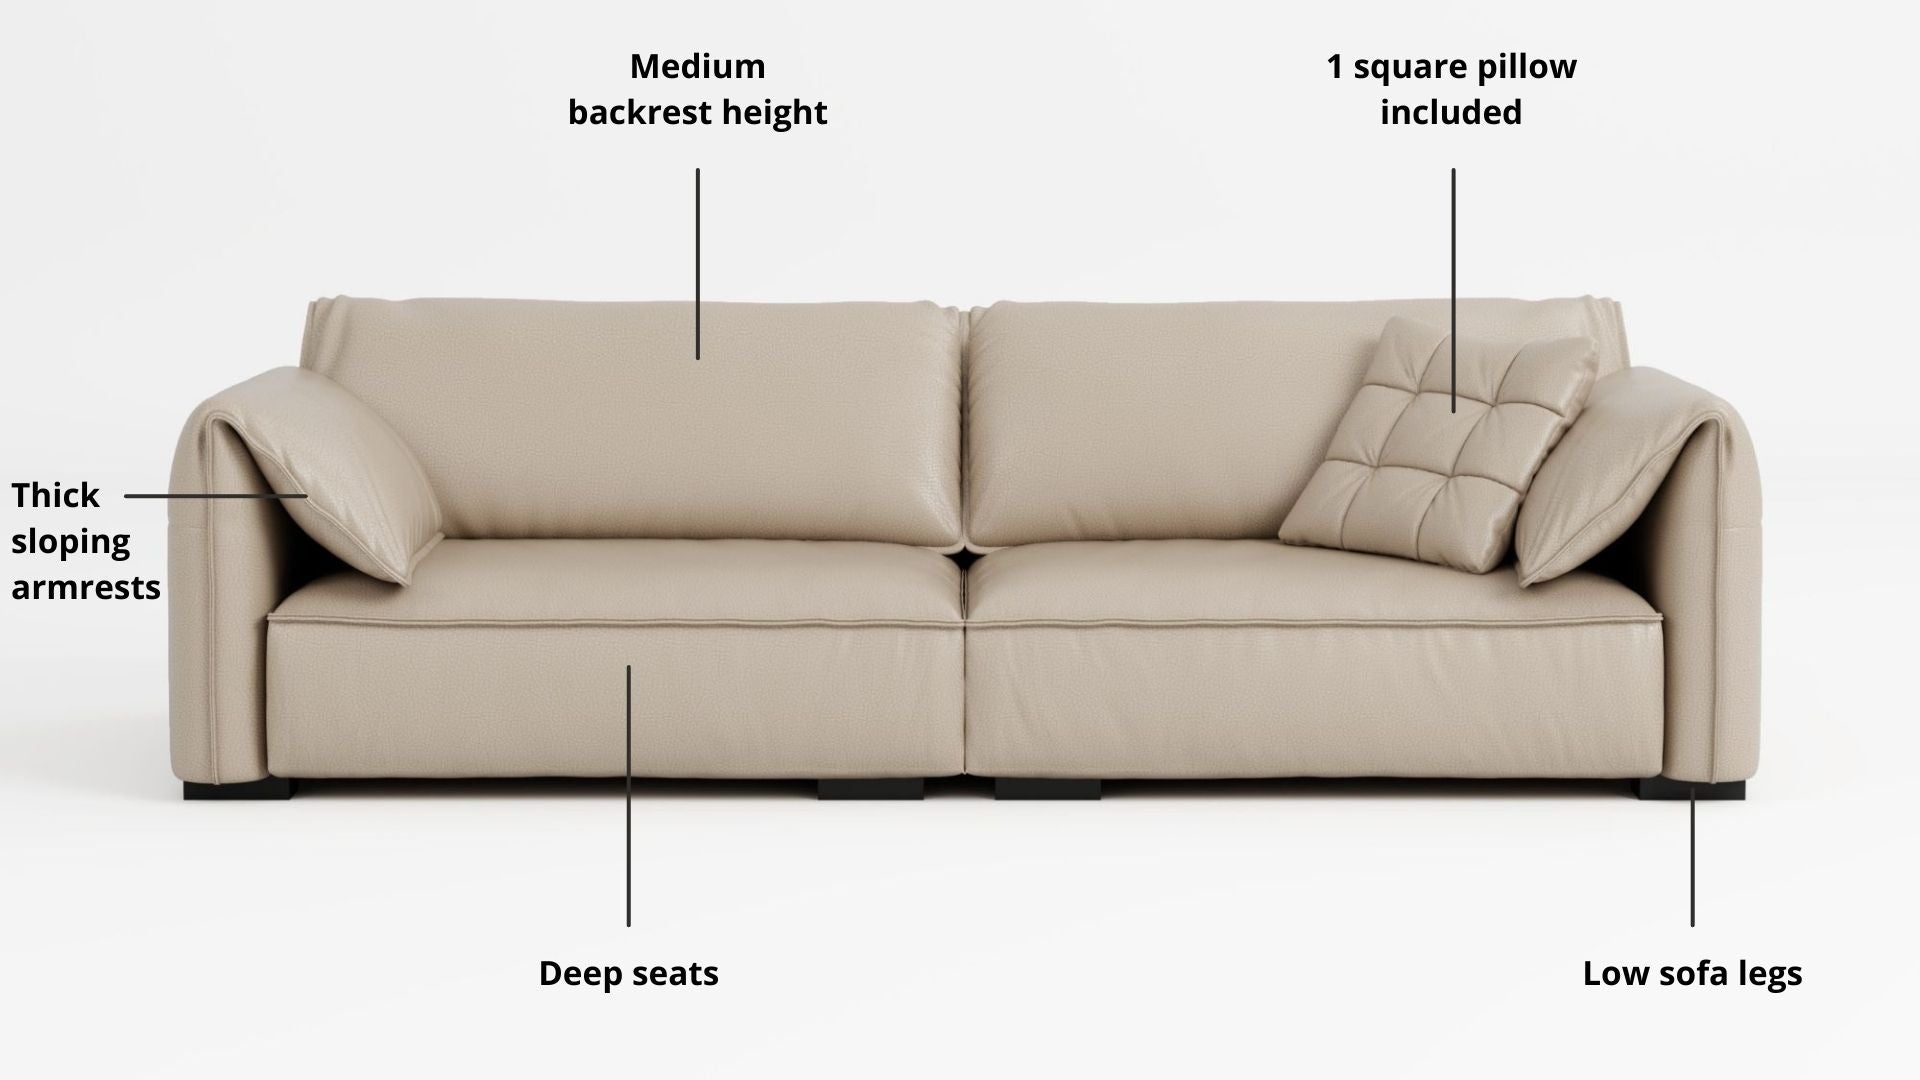 Key features such as armrest thickness, cushion height, seat depth and sofa leg height for Comfy Half Leather Sofa